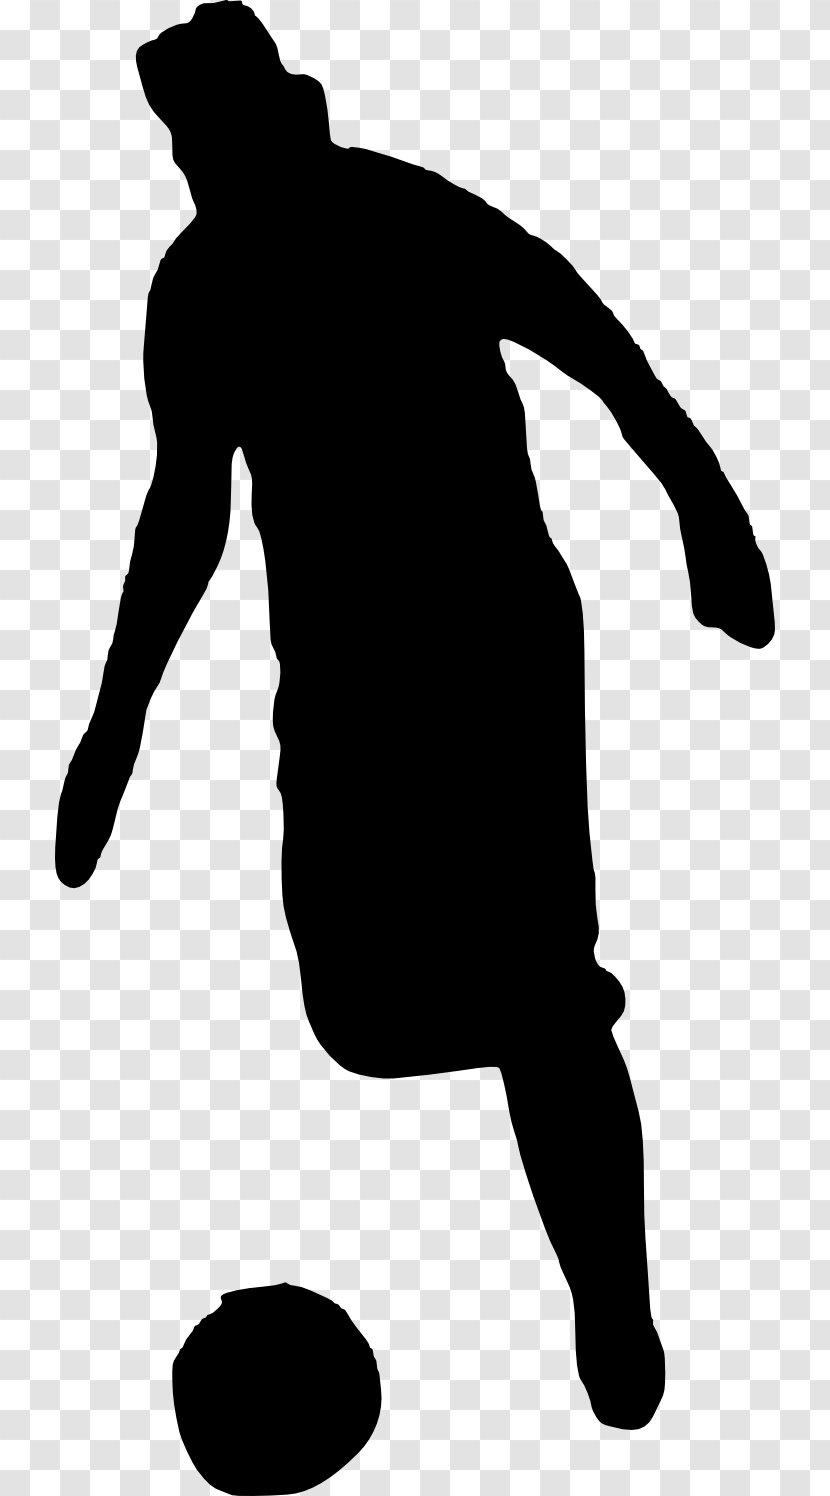 Silhouette Football Player Clip Art Transparent PNG